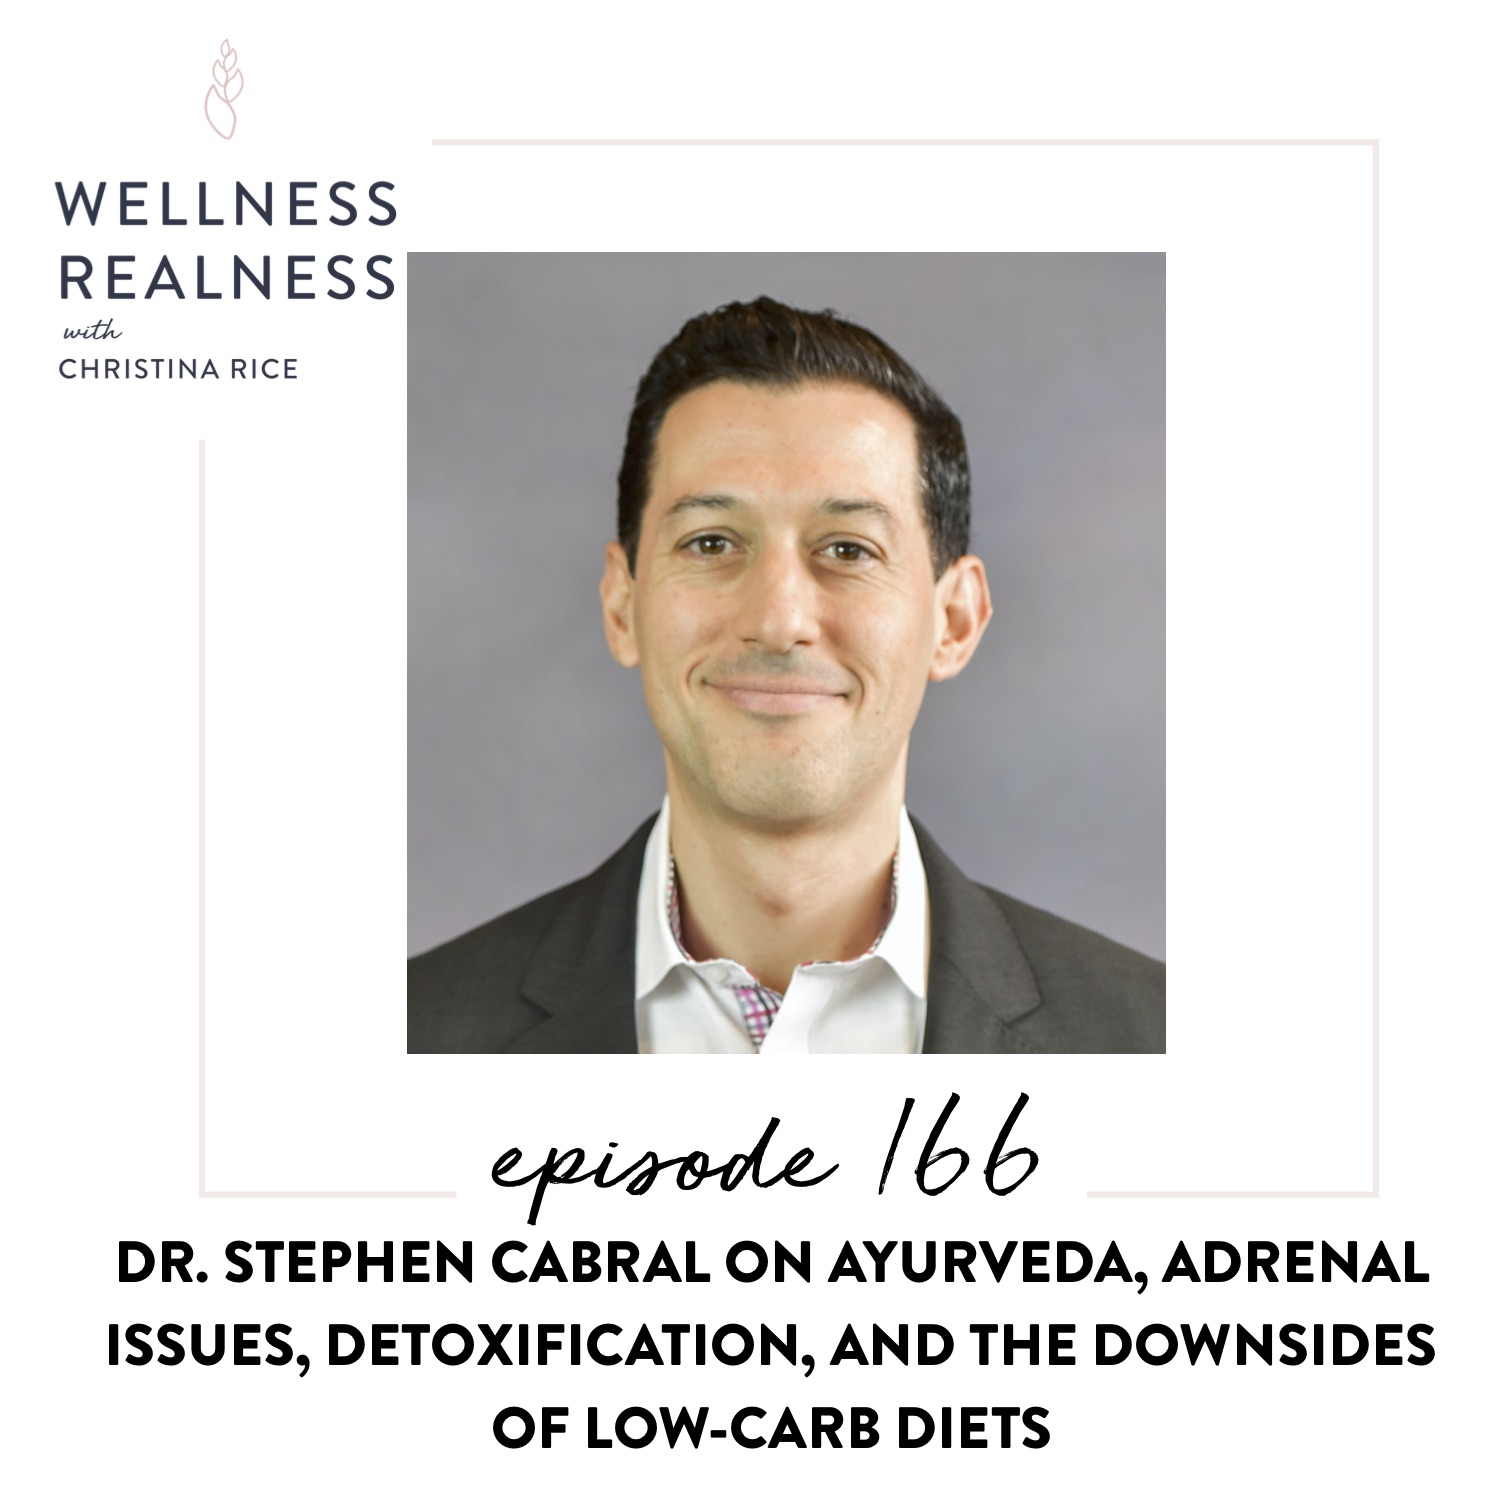 166: Dr. Stephen Cabral on Ayurveda, Adrenal Issues, Detoxification, and the Downsides of Low-Carb Diets